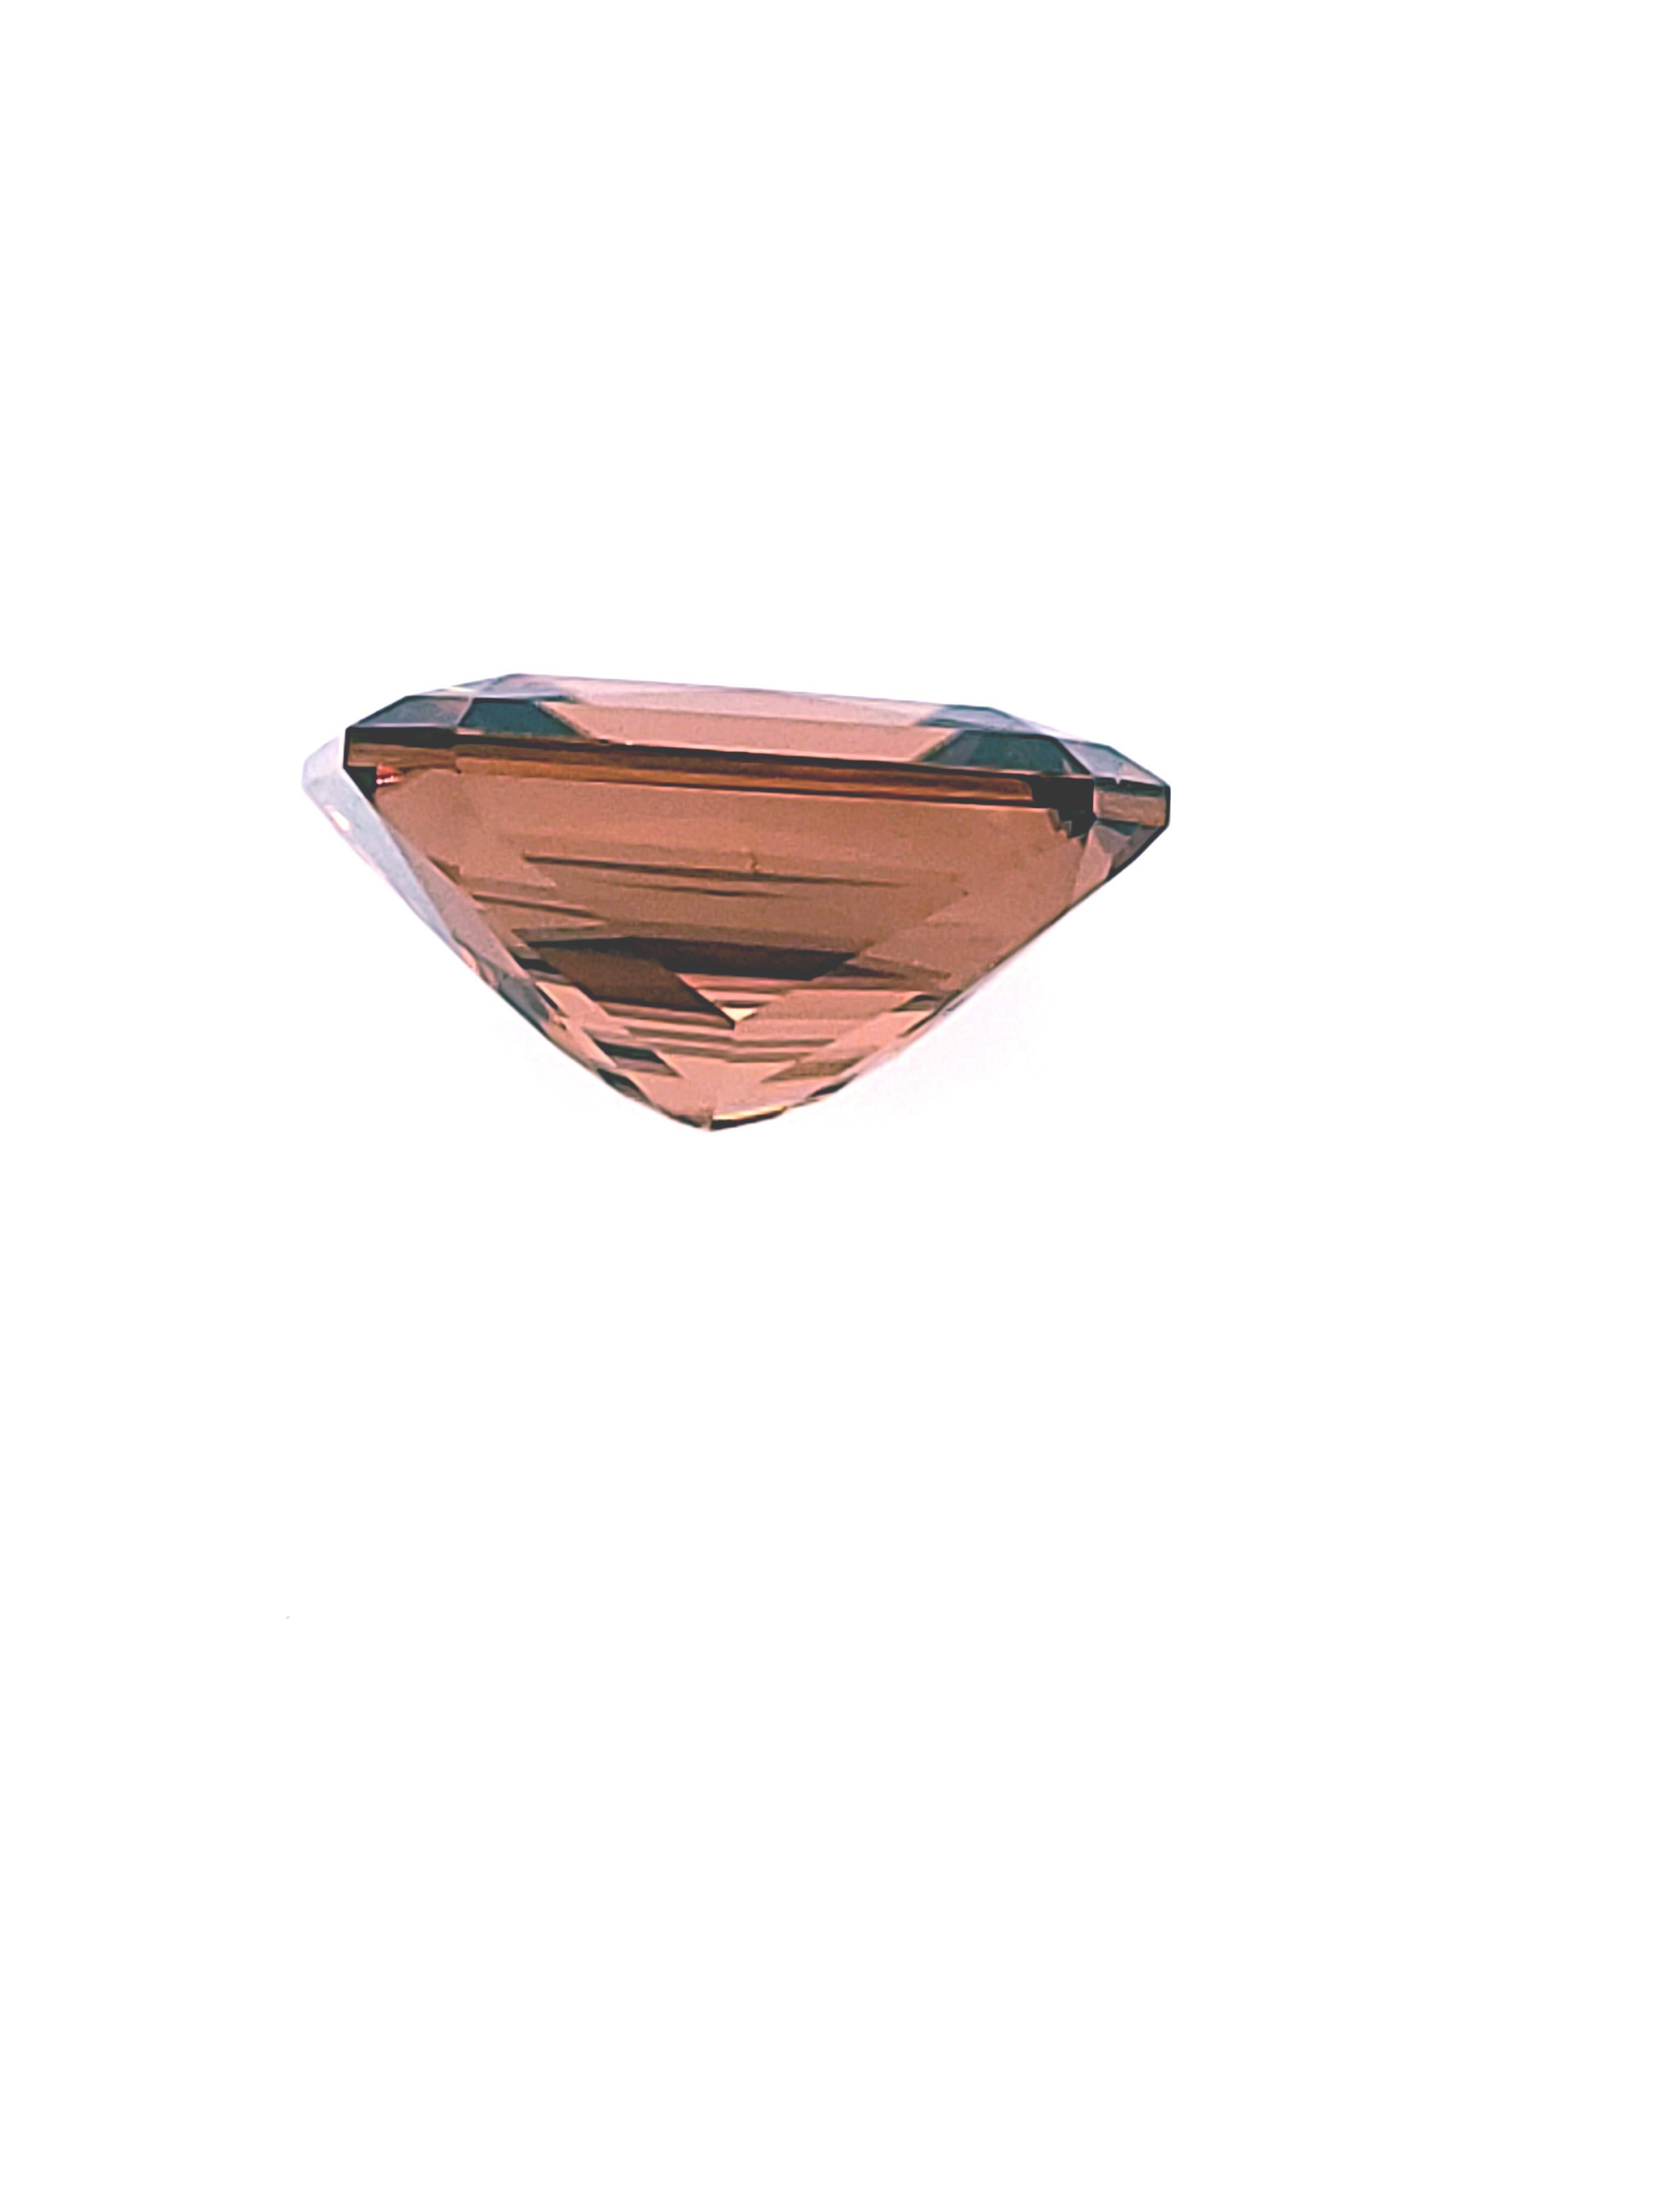 Women's or Men's Orangy Zircon, Emerald Cut, weighing 8.71ct and Faceted in the U.S. For Sale